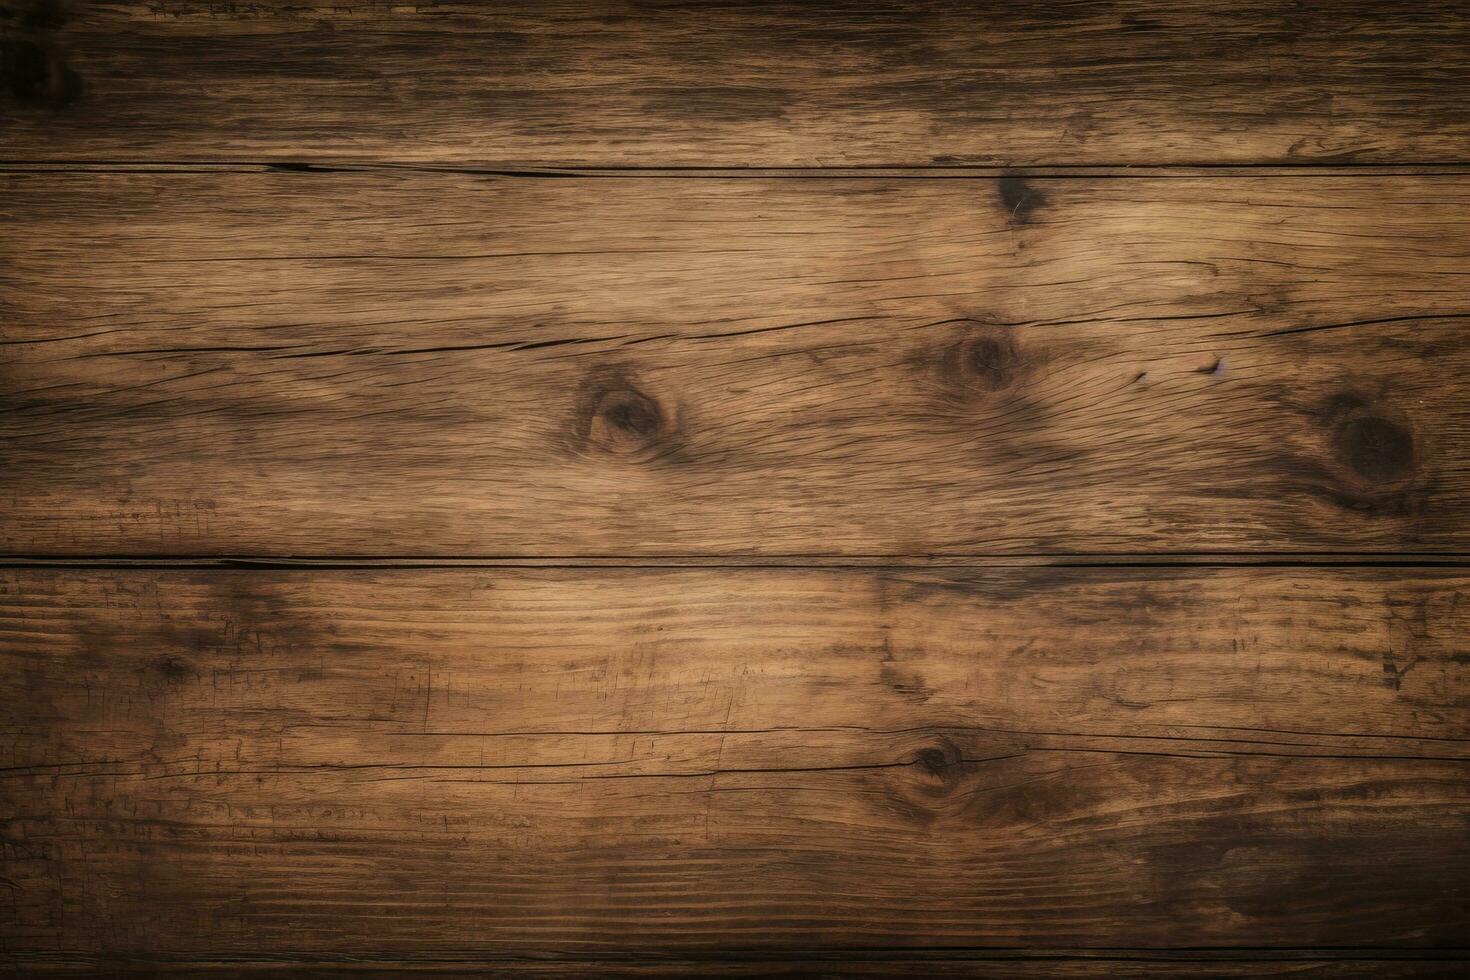 Natural rustic wood backdrop aged wooden texture planks for a vintage look backdrop photo